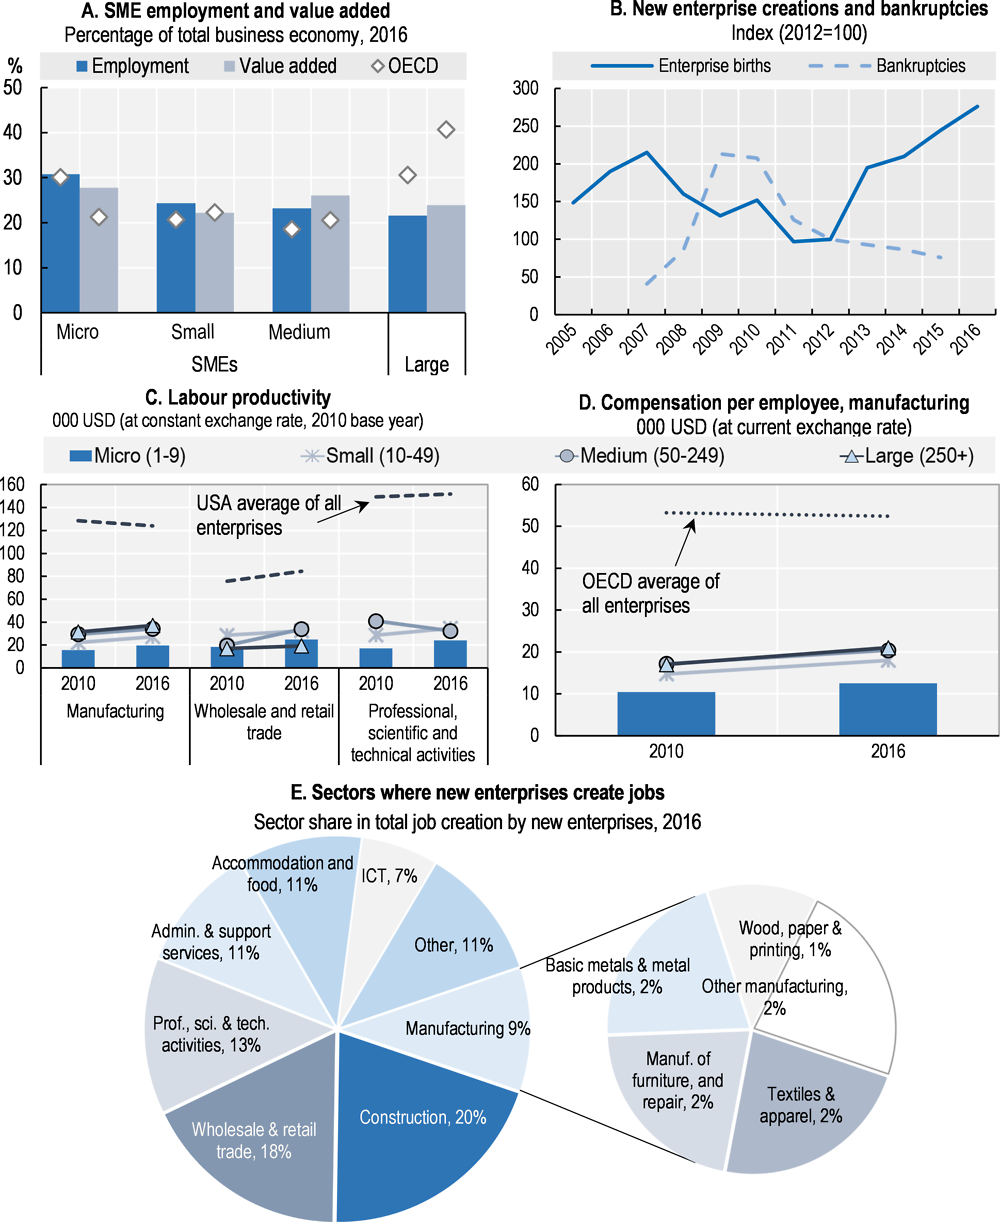 Figure 16.1. Structure and performance of the SME sector in Estonia